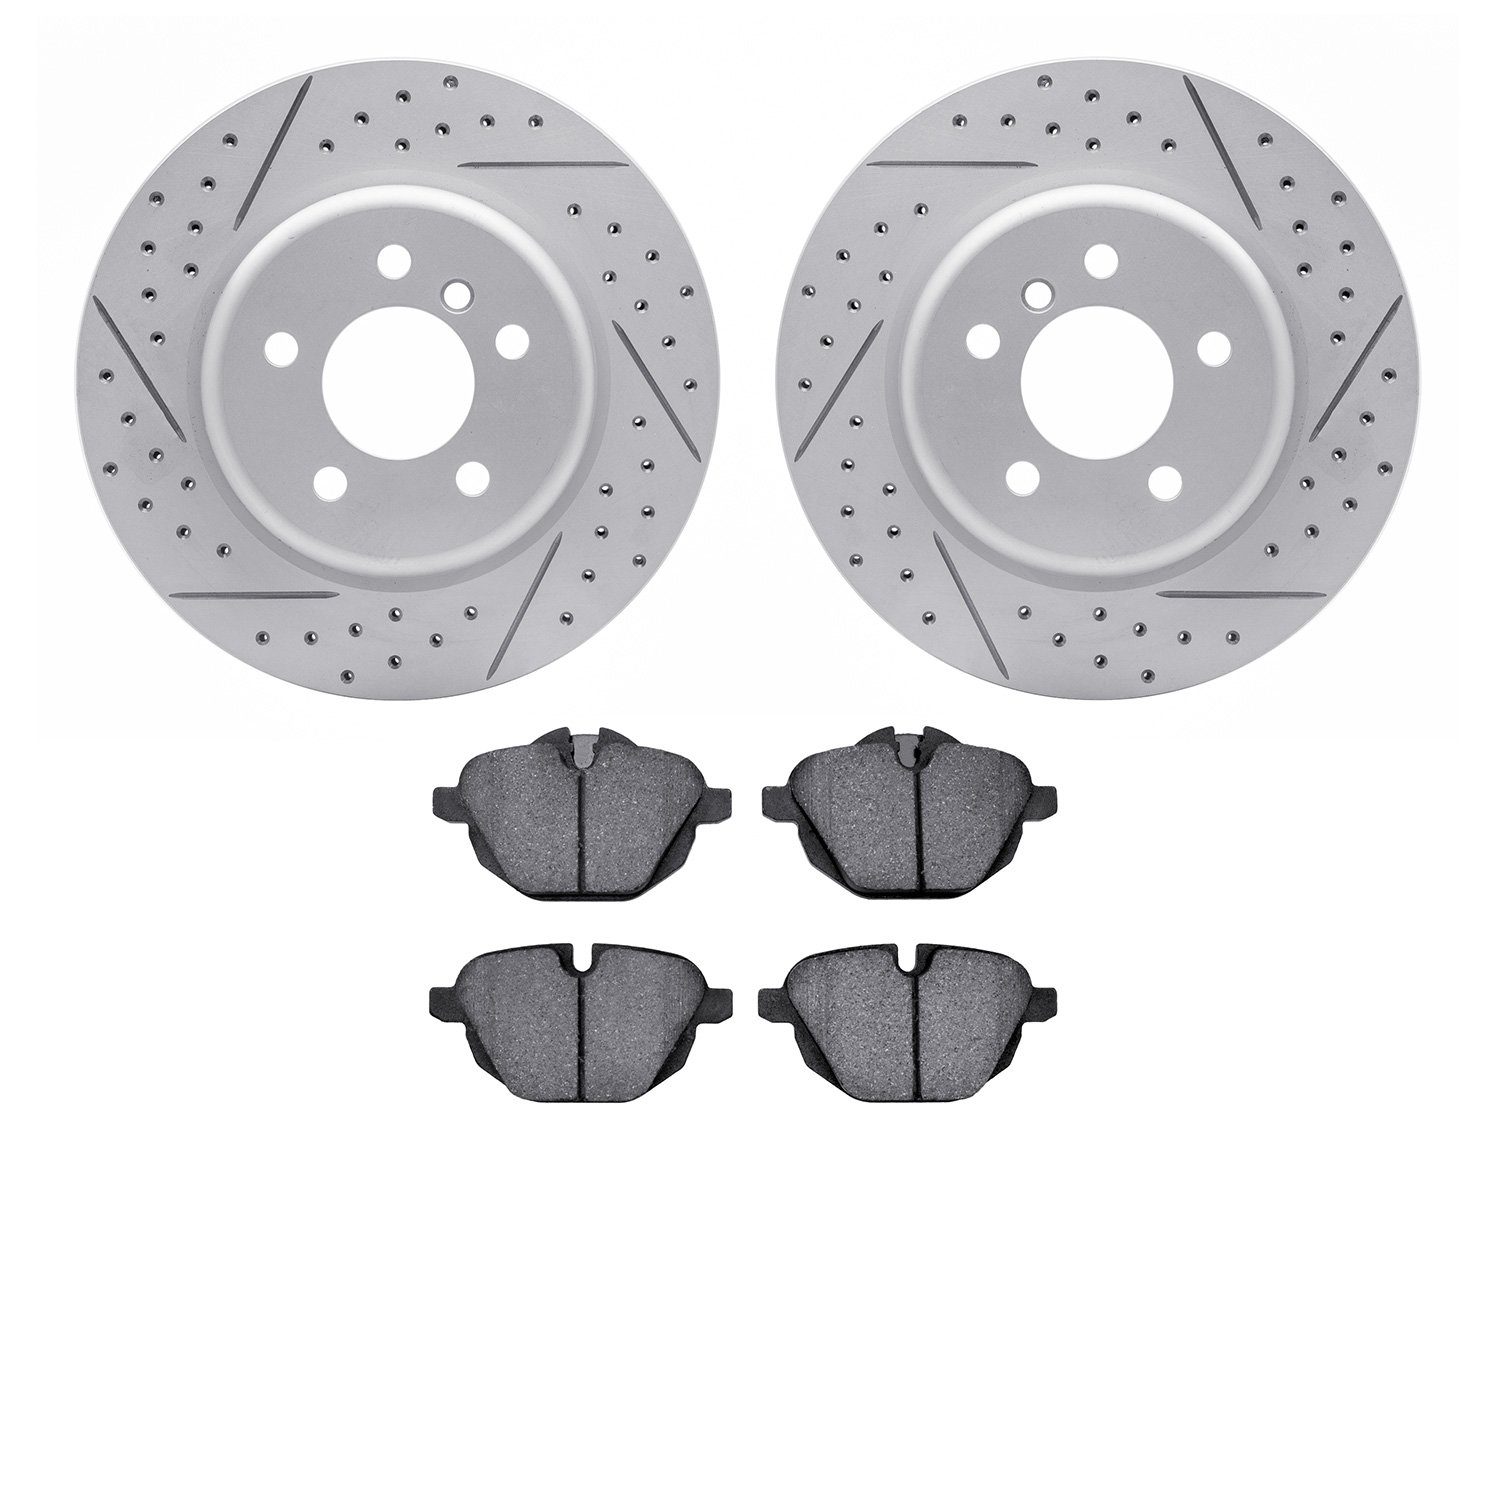 2502-31078 Geoperformance Drilled/Slotted Rotors w/5000 Advanced Brake Pads Kit, 2014-2016 BMW, Position: Rear